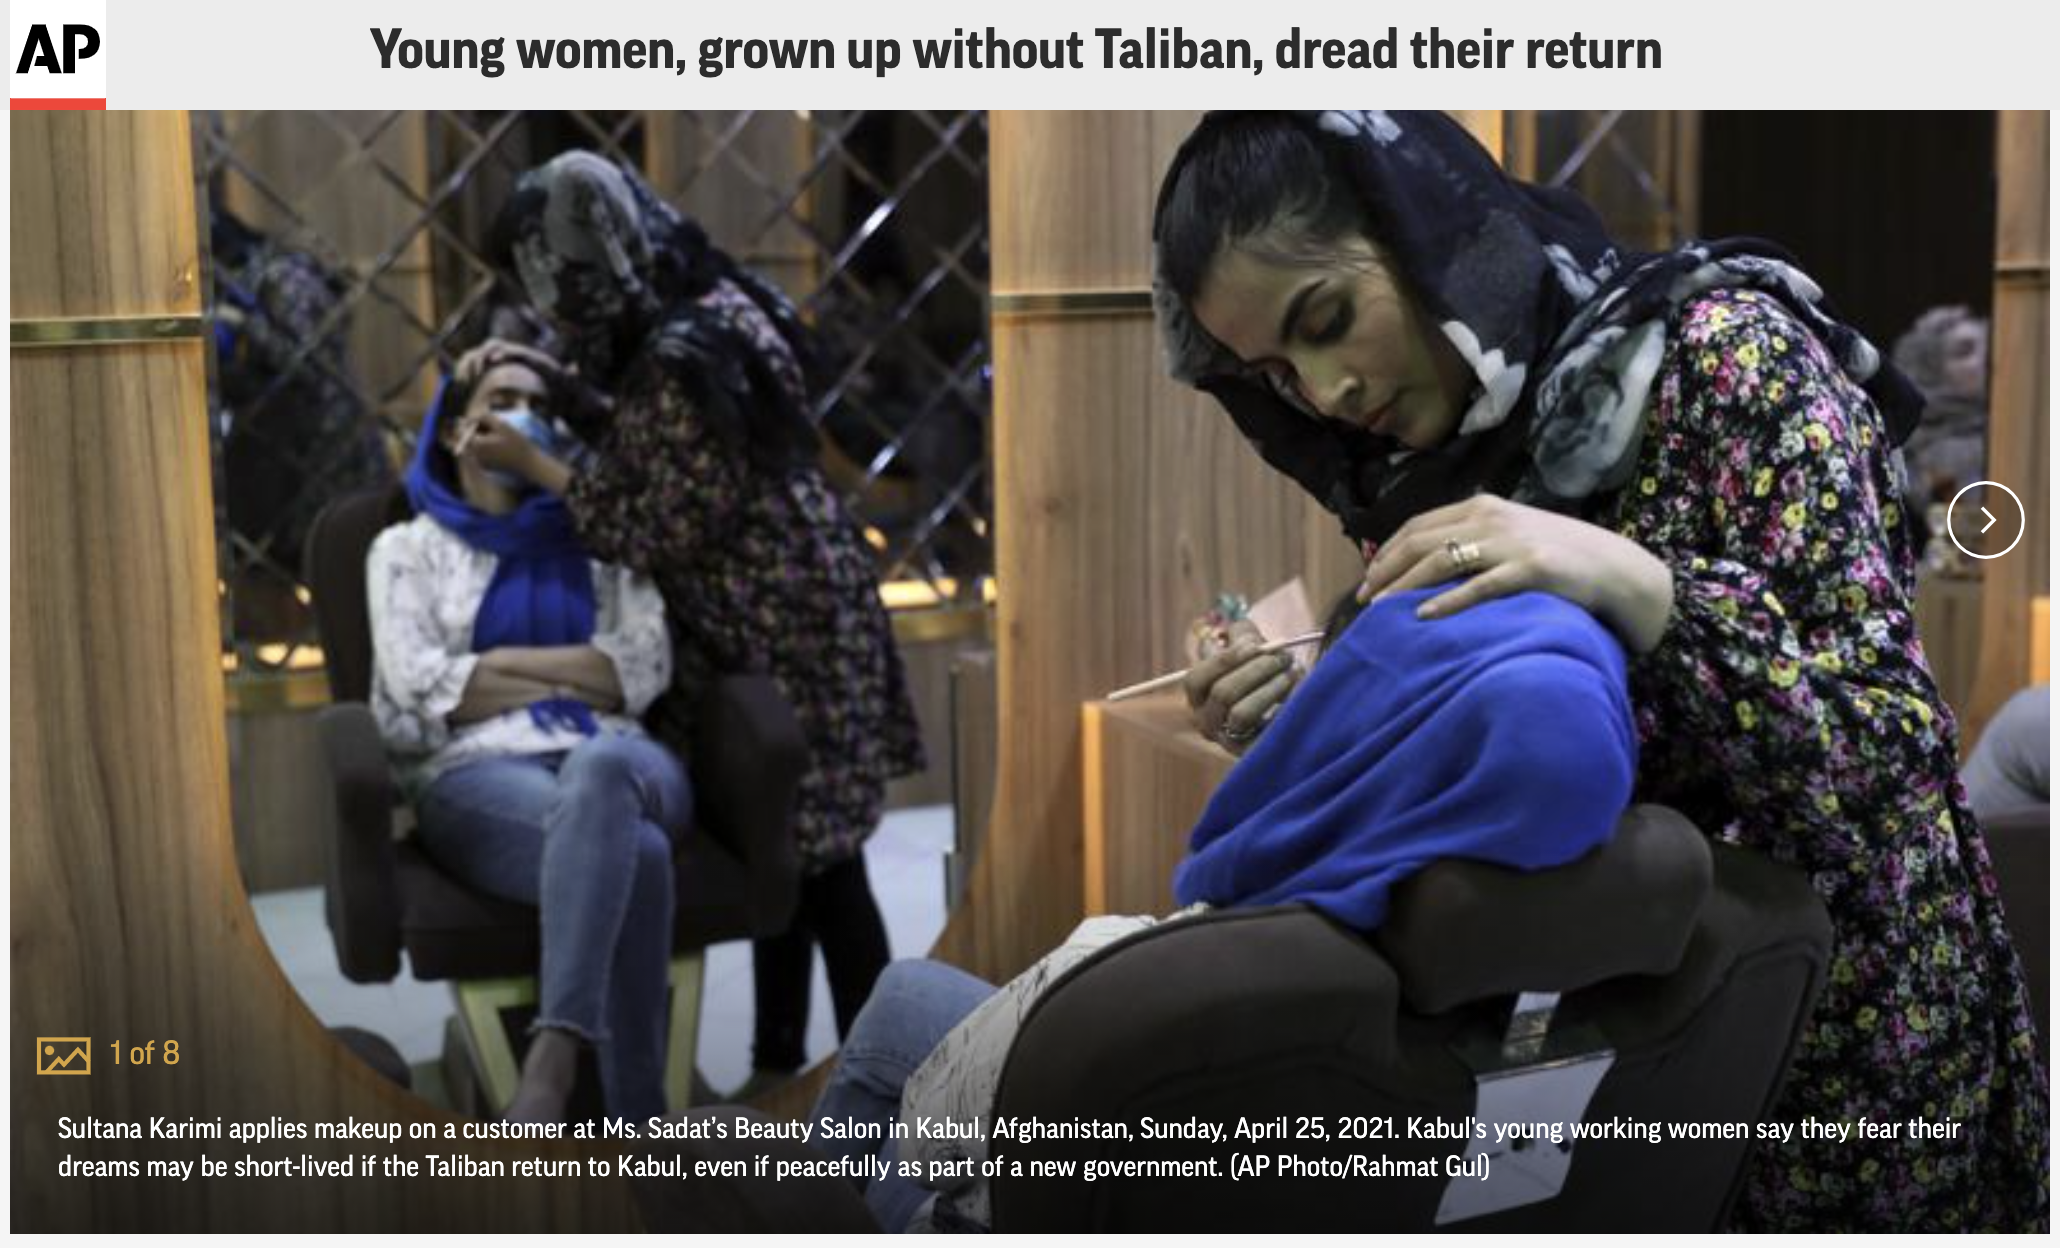 AP: Young women, grown up without Taliban, dread their return